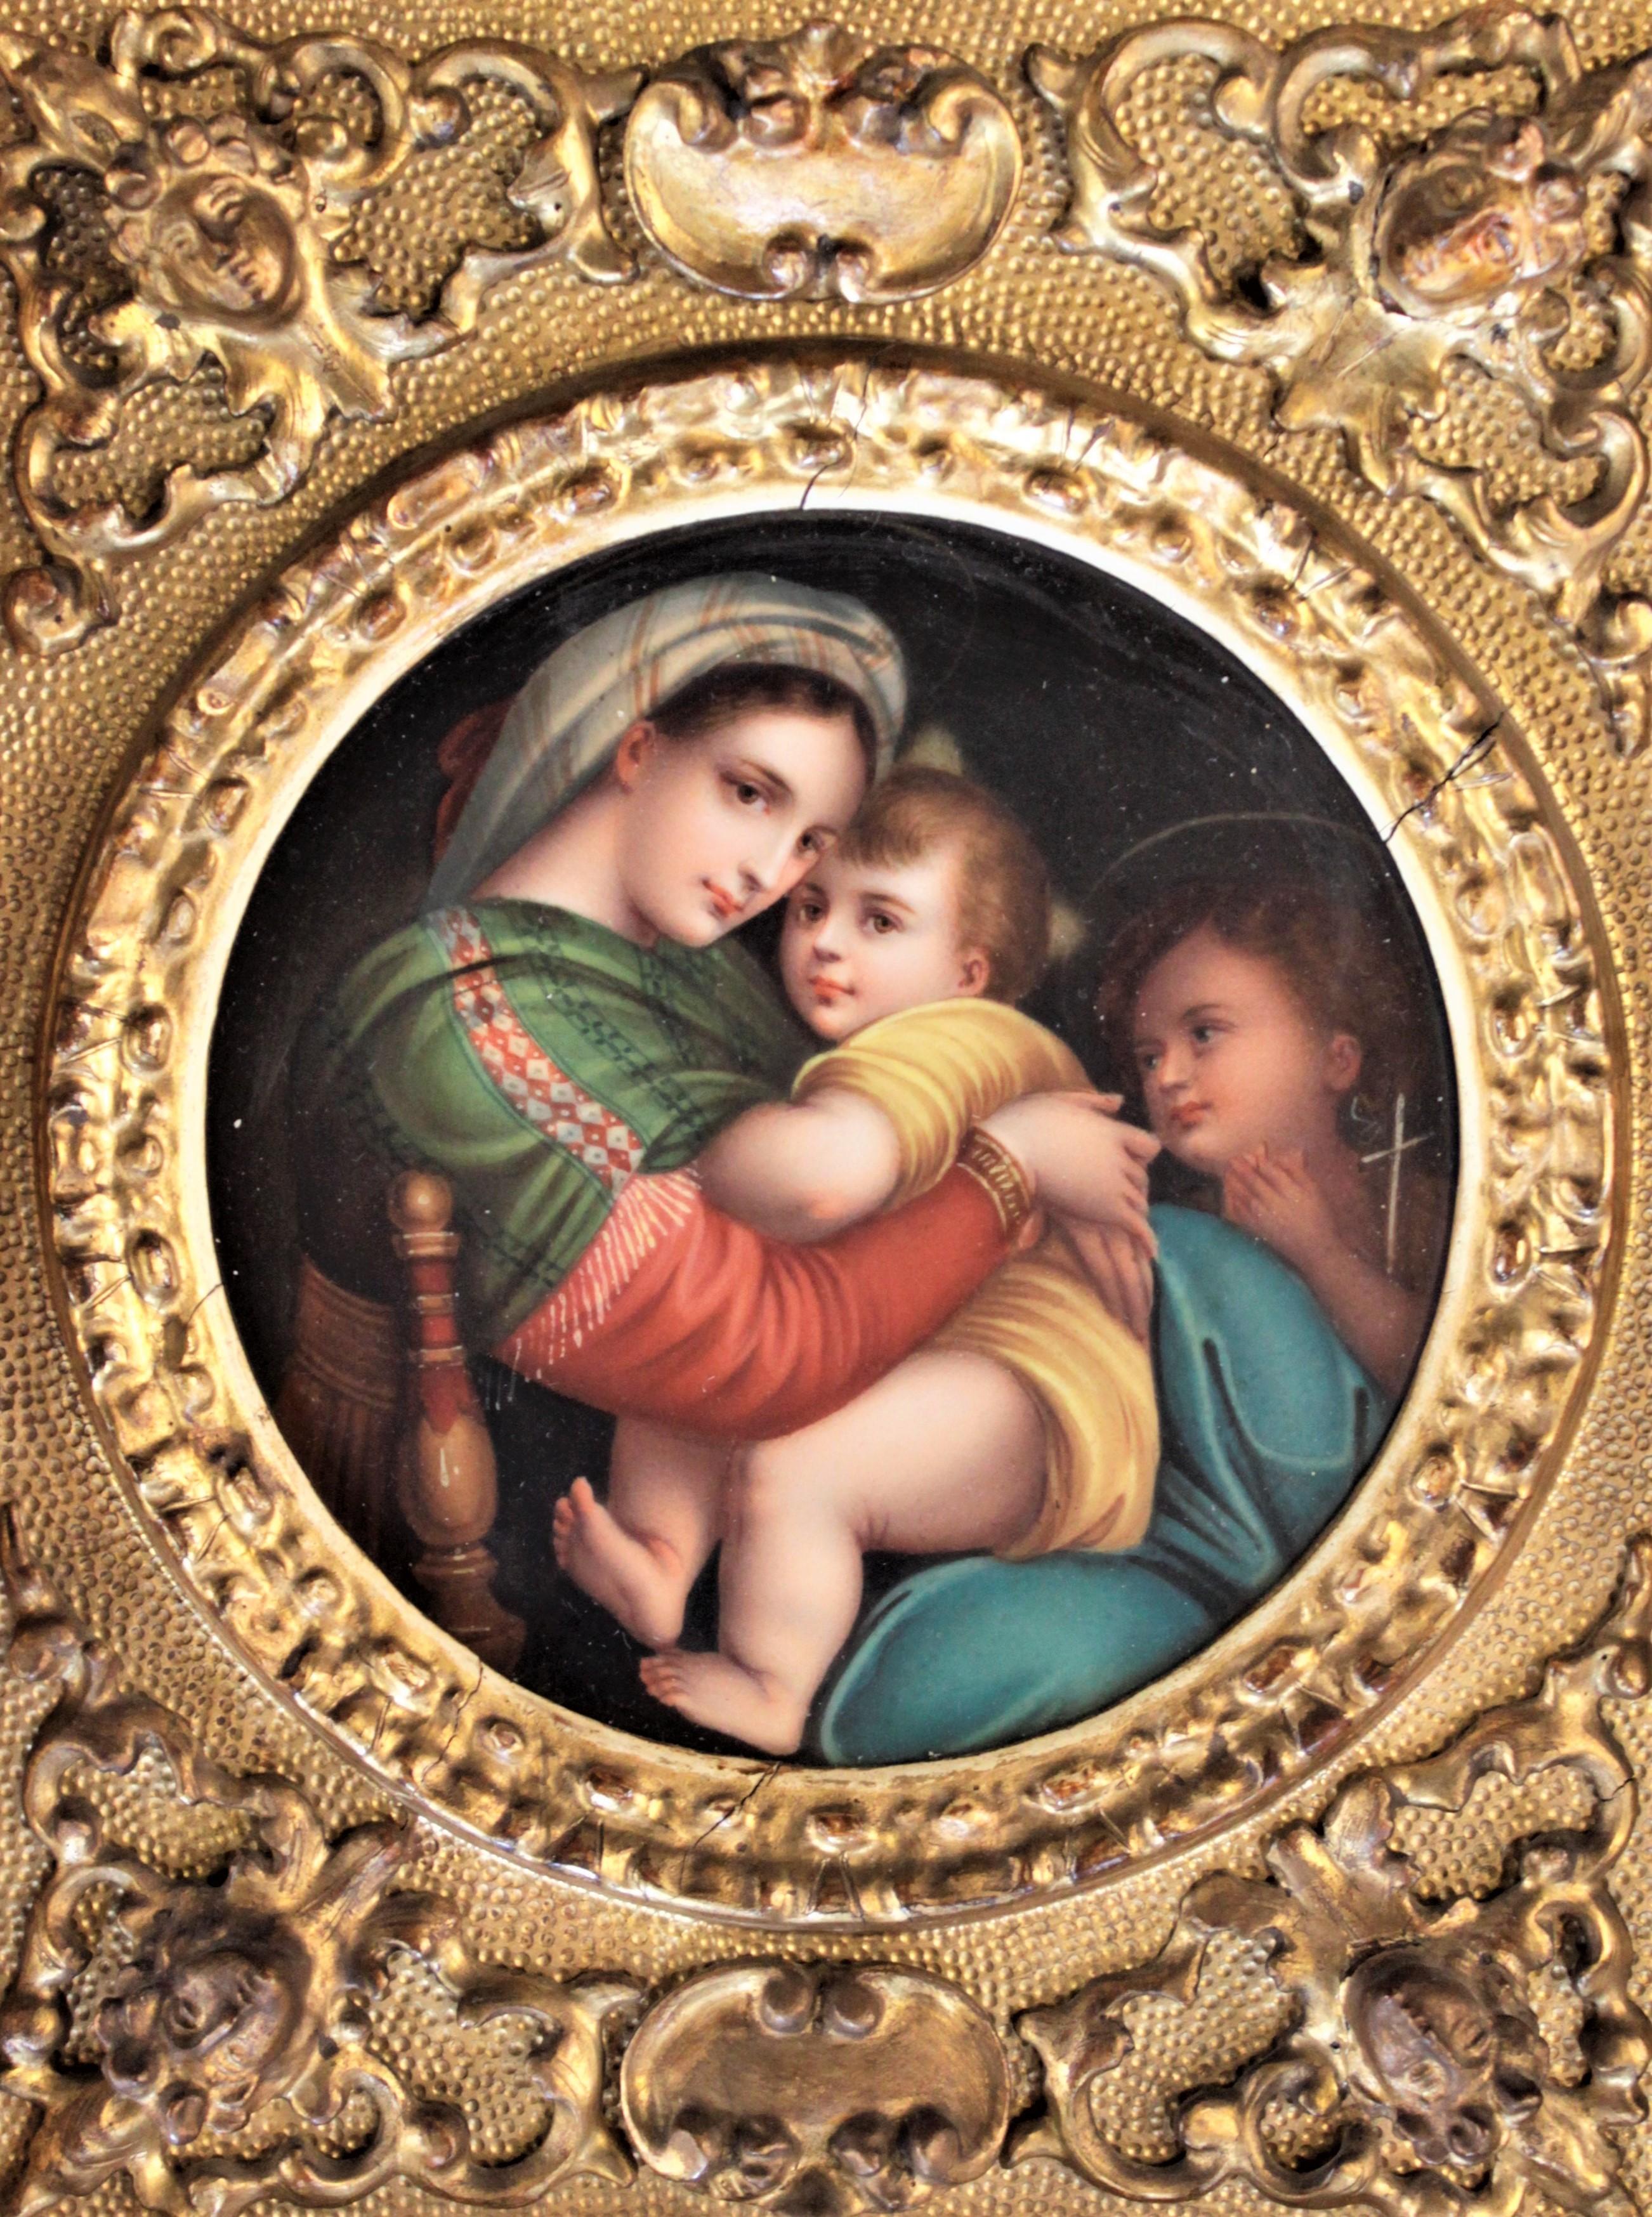 This antique hand painted porcelain panel is unsigned but was done in Italy in circa 1890 in the Roccoco style. The hand painted porcelain disc of La Madonna della Sedia, after Rafael Sanzio. The hand painted plaque depicts a seated Madonna with a